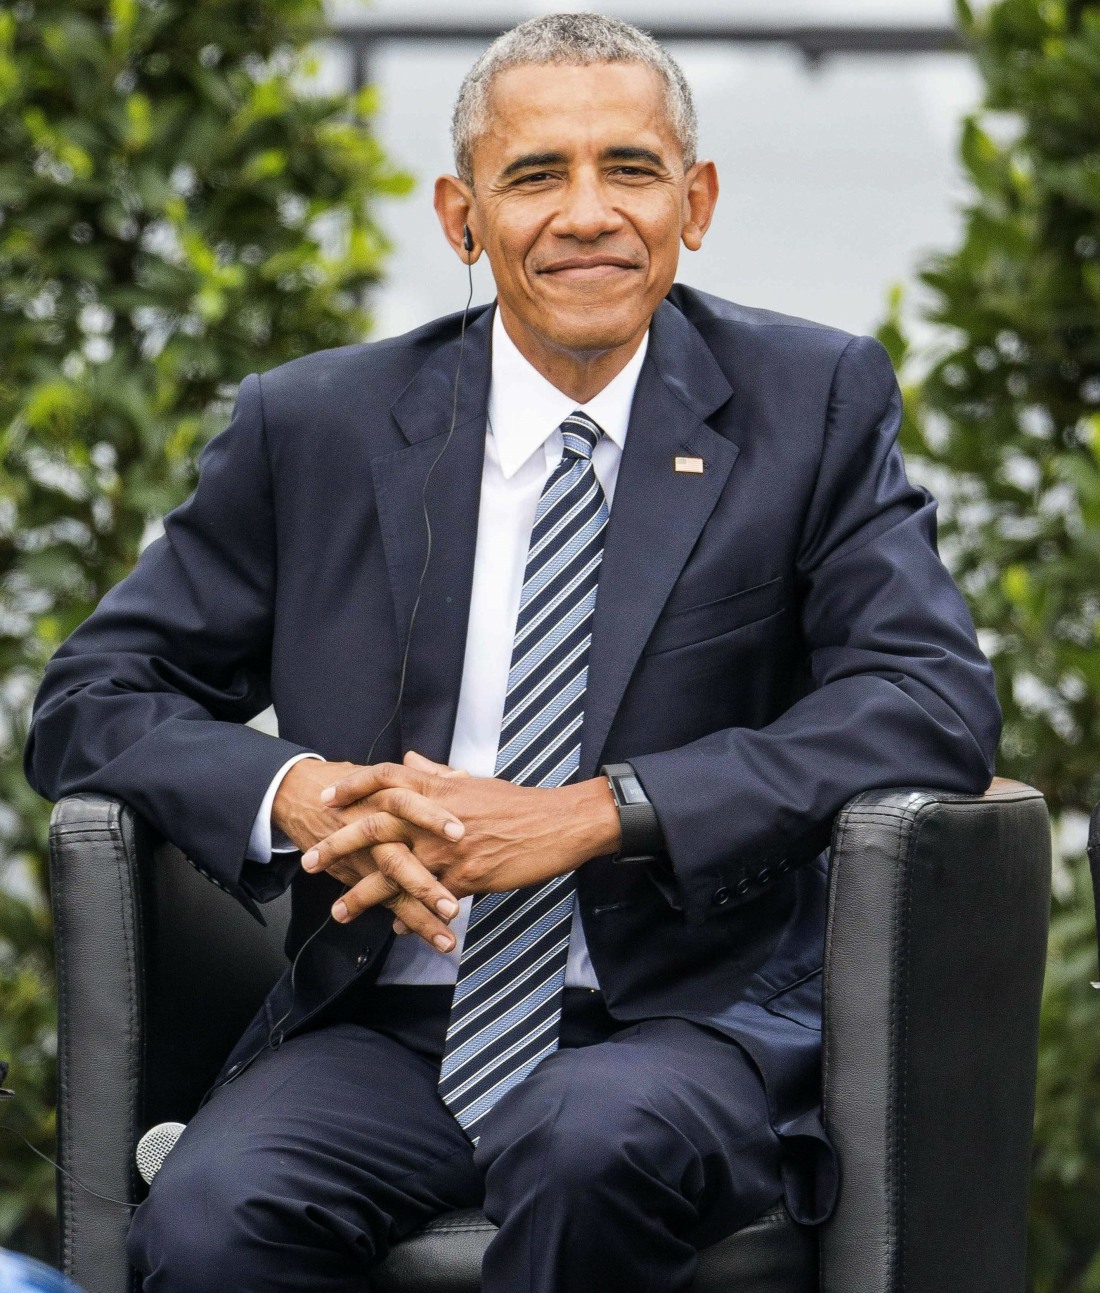 Barack Obama attends a Panel discussion in Berlin